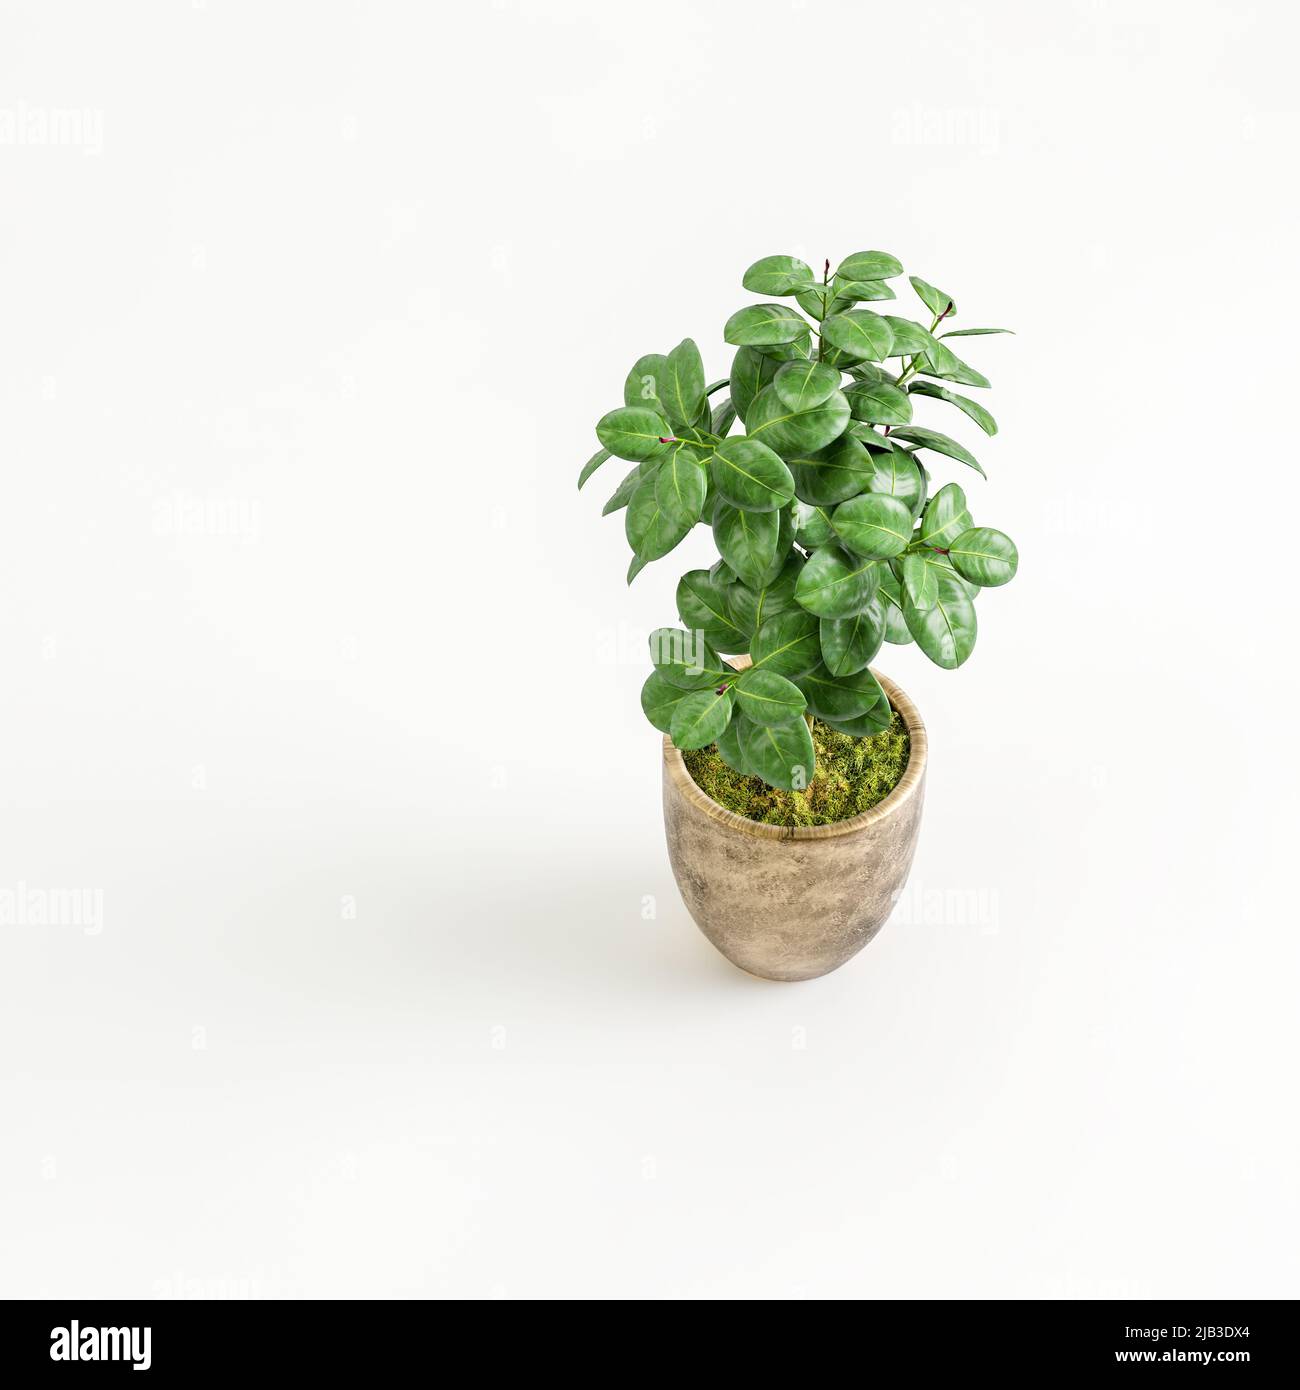 3d illustration of houseplant in modern potted bird's-eye view Stock Photo